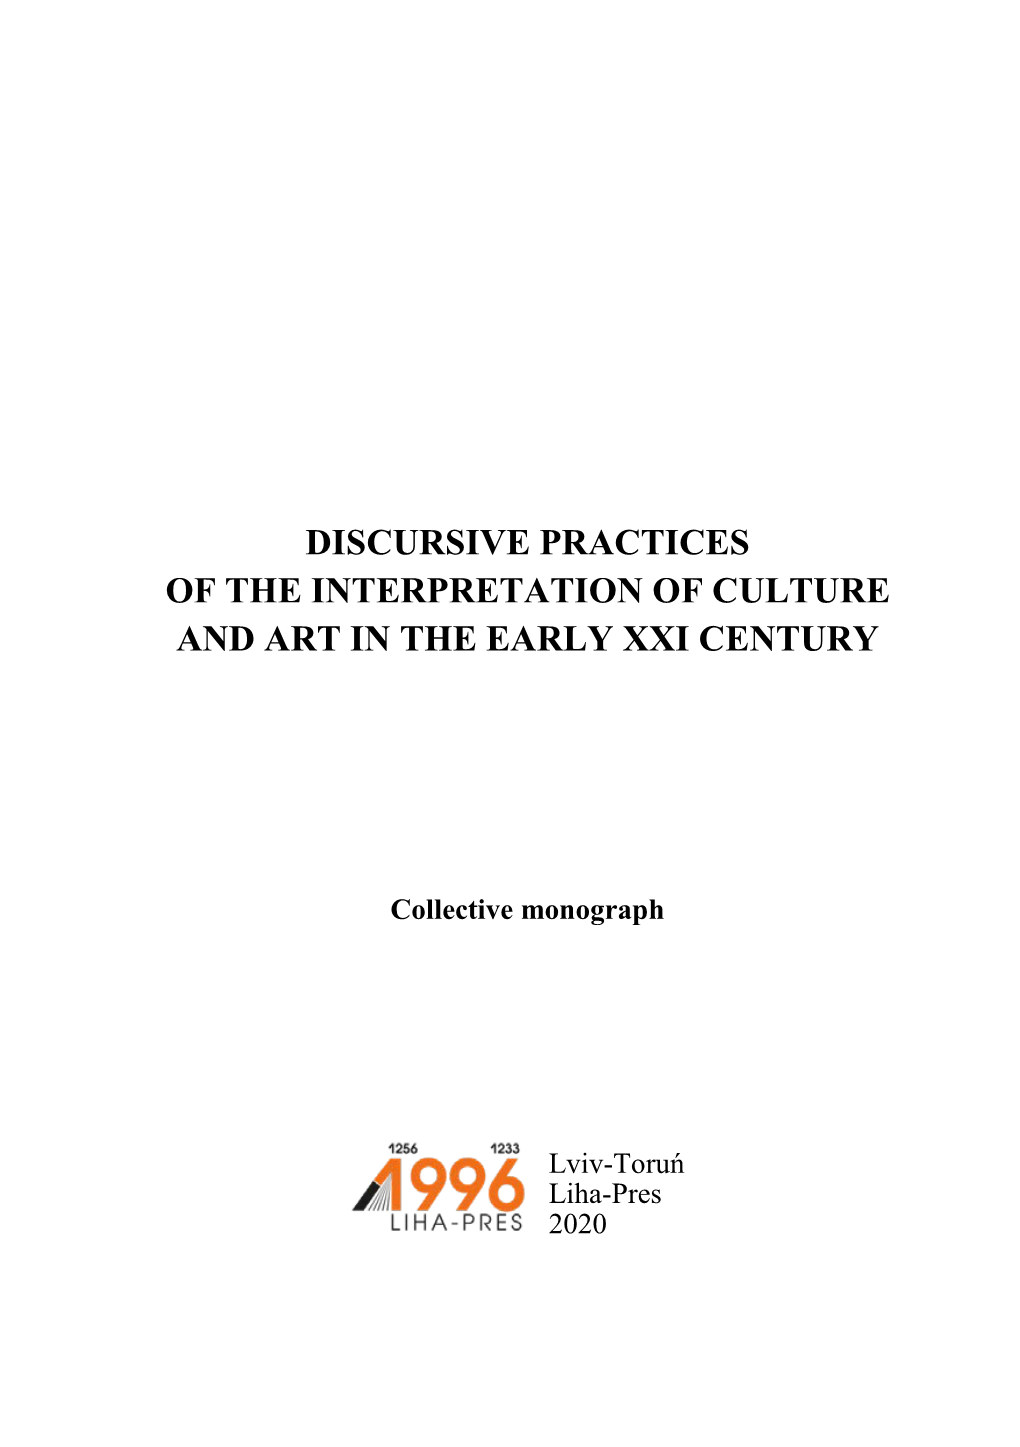 Discursive Practices of the Interpretation of Culture and Art in the Early Xxi Century